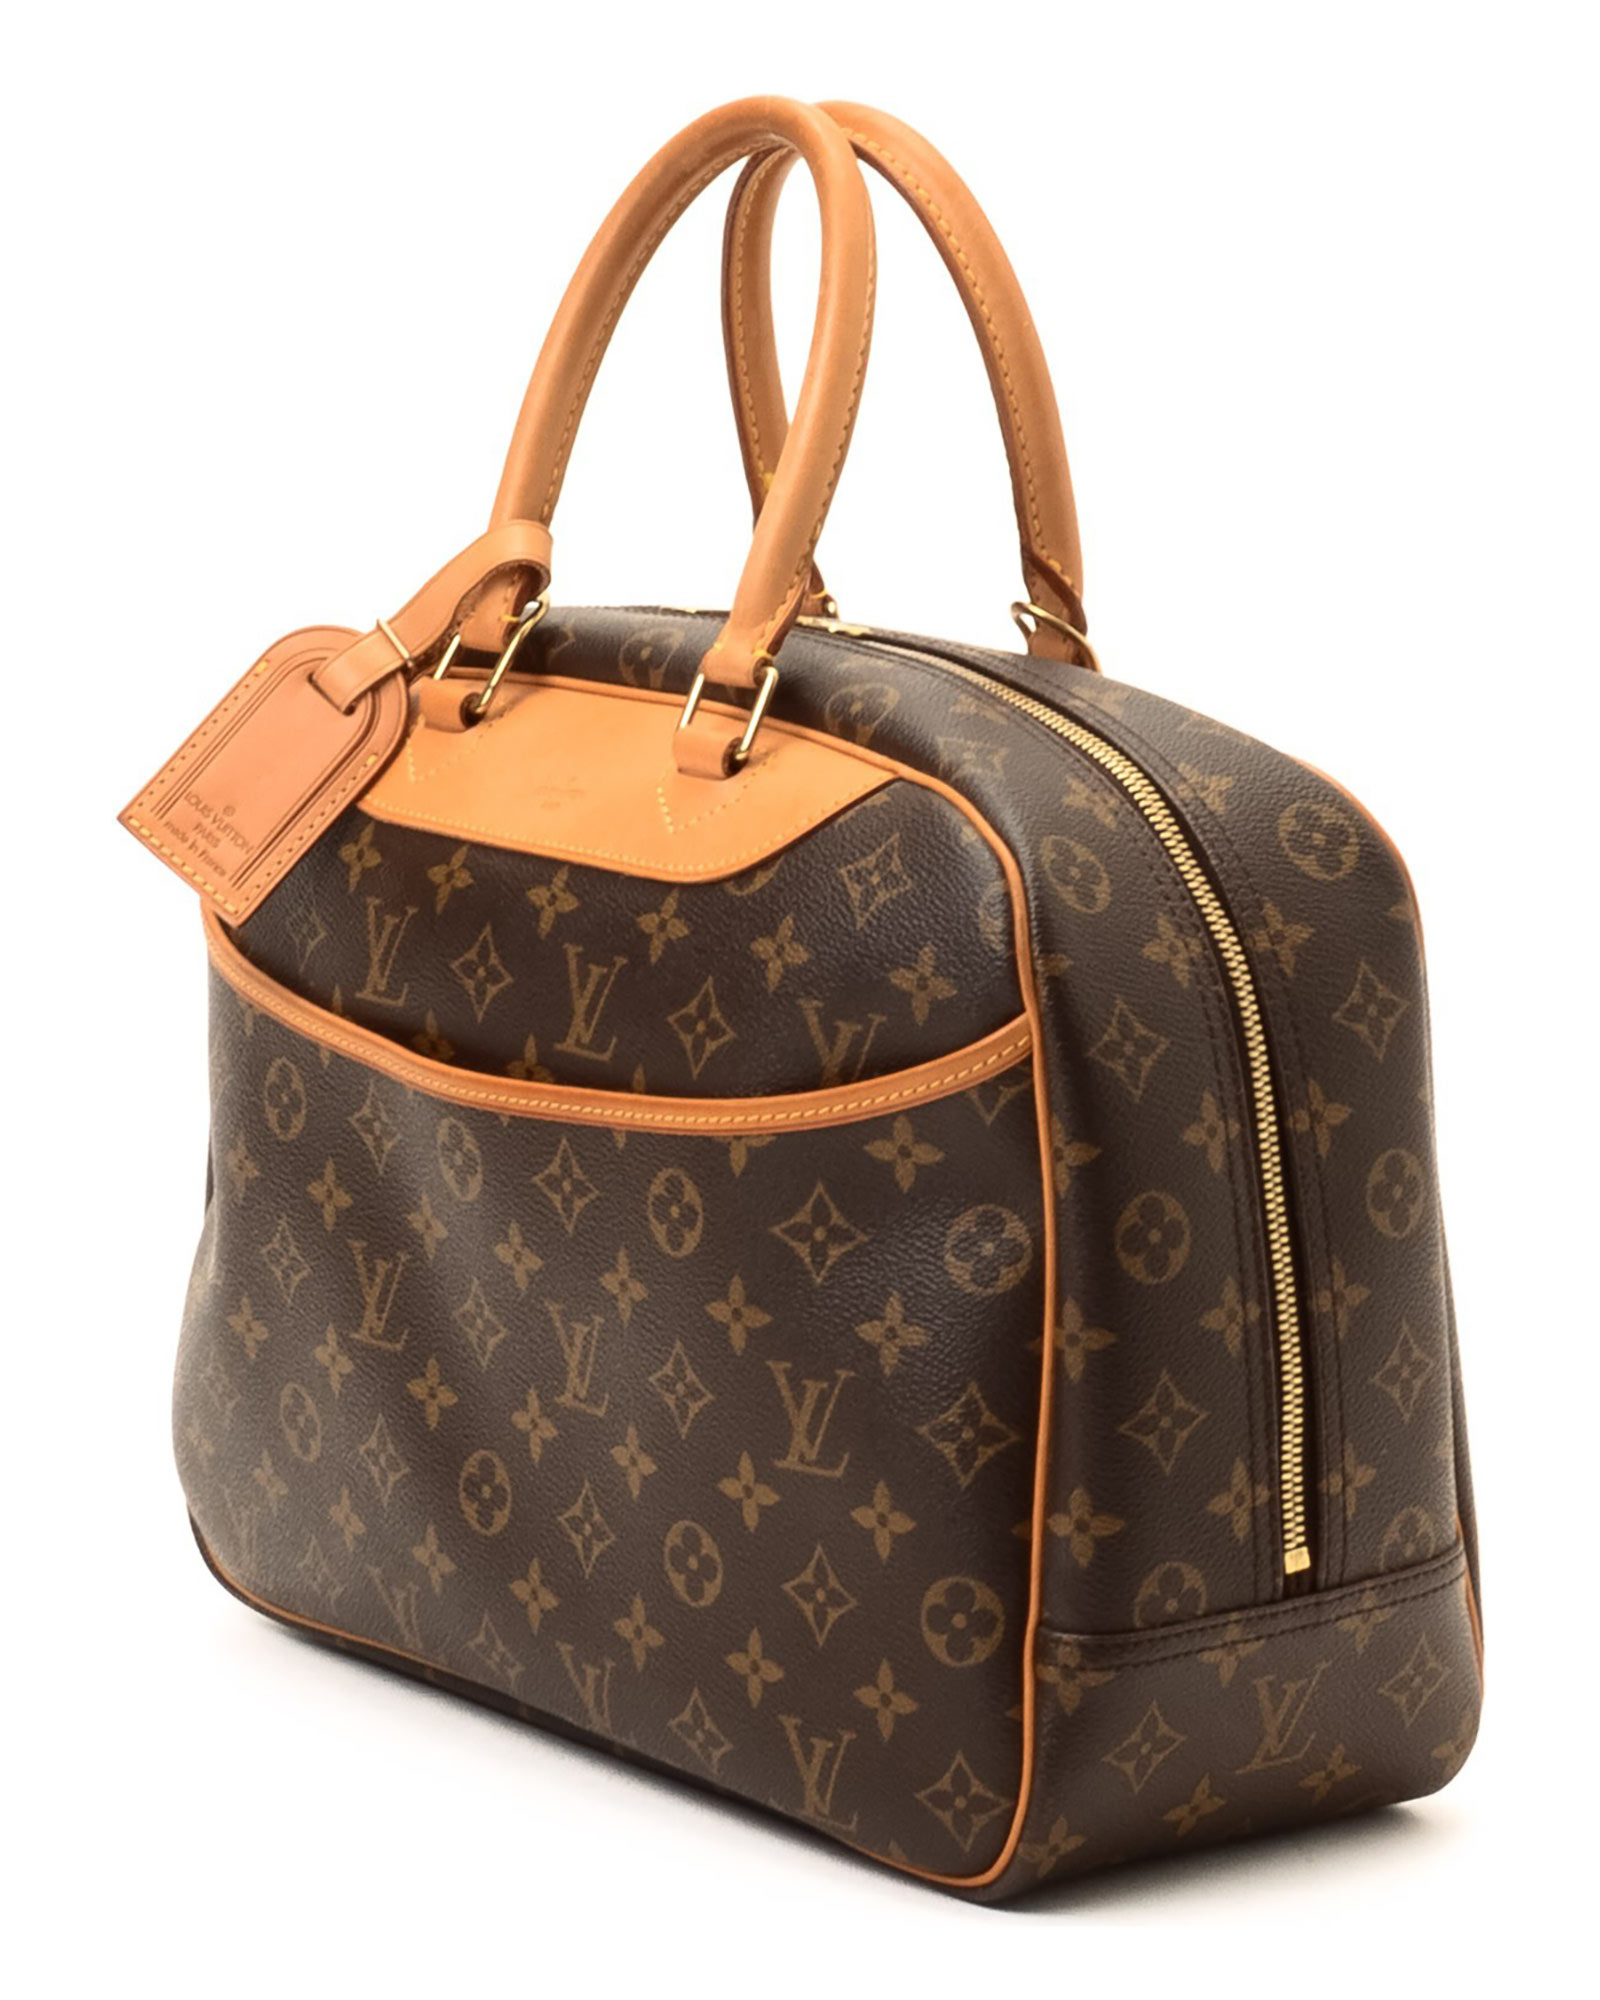 What Is The Cheapest Louis Vuitton Bag Uk | IQS Executive